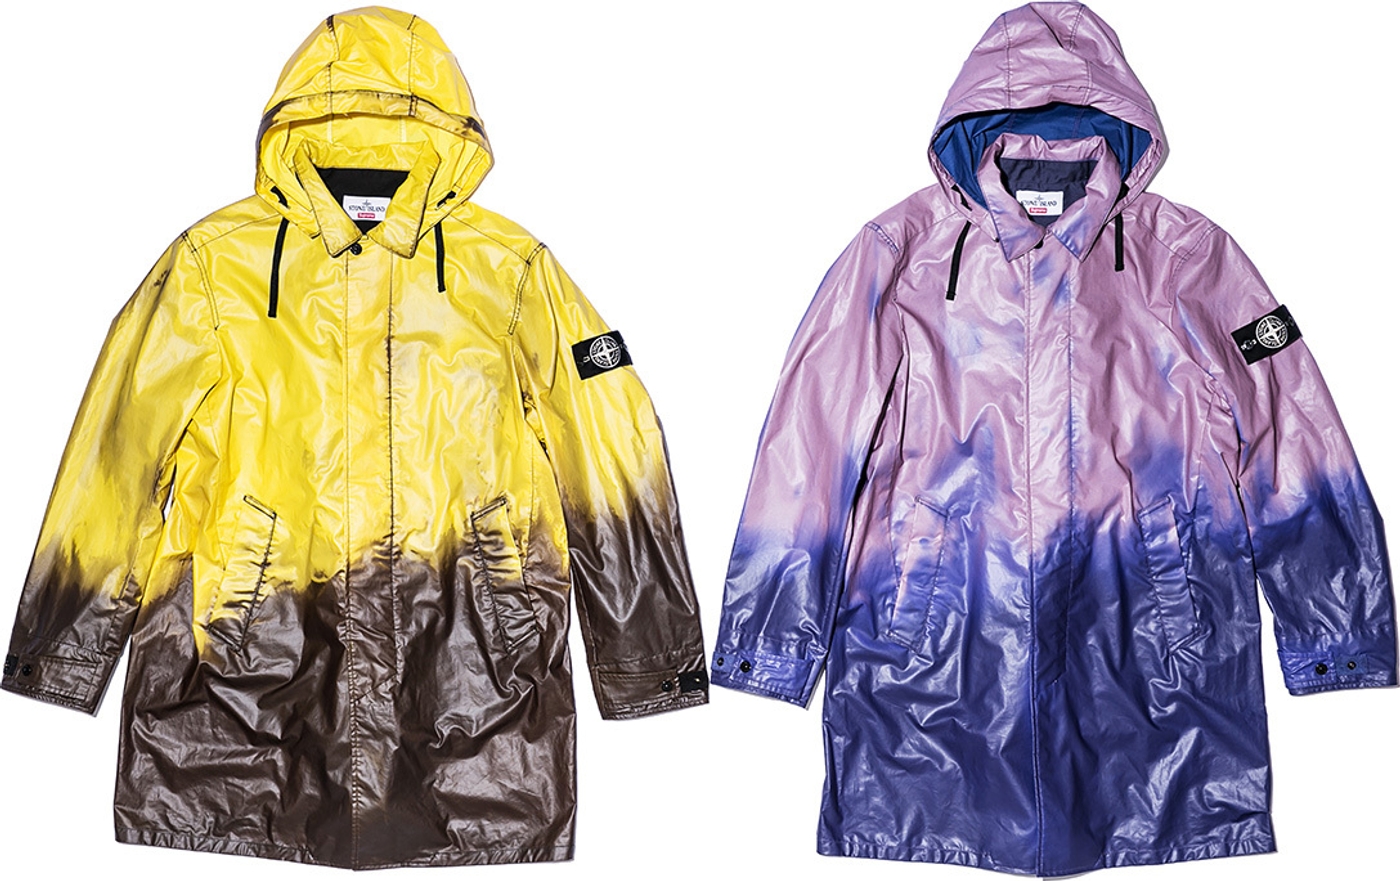 Water resistant thermosensitive Heat Reactive polyurethane coated cotton fabric with removable hood. (8/24)